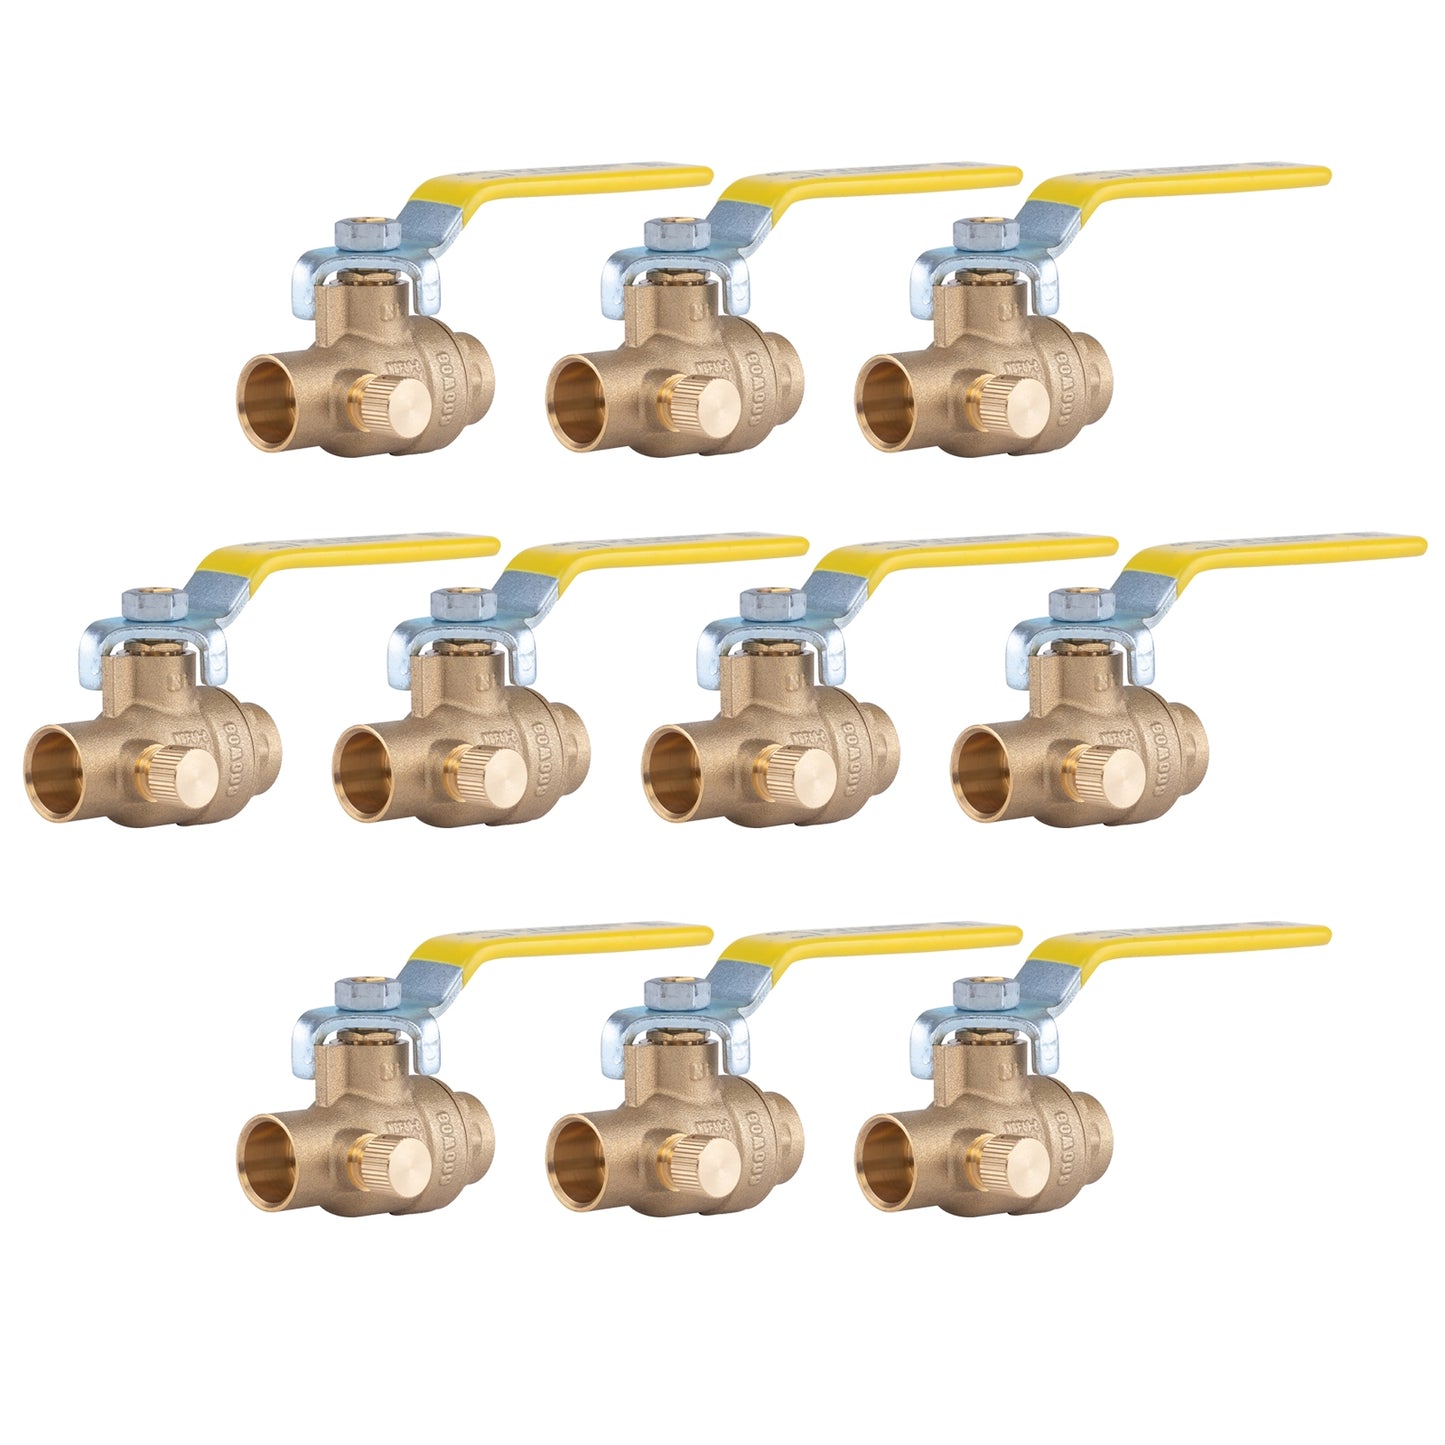 Hausen 1/2-inch Sweat x 1/2-inch Sweat Full Port Brass Ball Valve with Drain; Lead Free Forged Brass; Blowout Resistant Stem; For Use in Potable Water, Oil and Gas Distribution Systems, 10-Pack